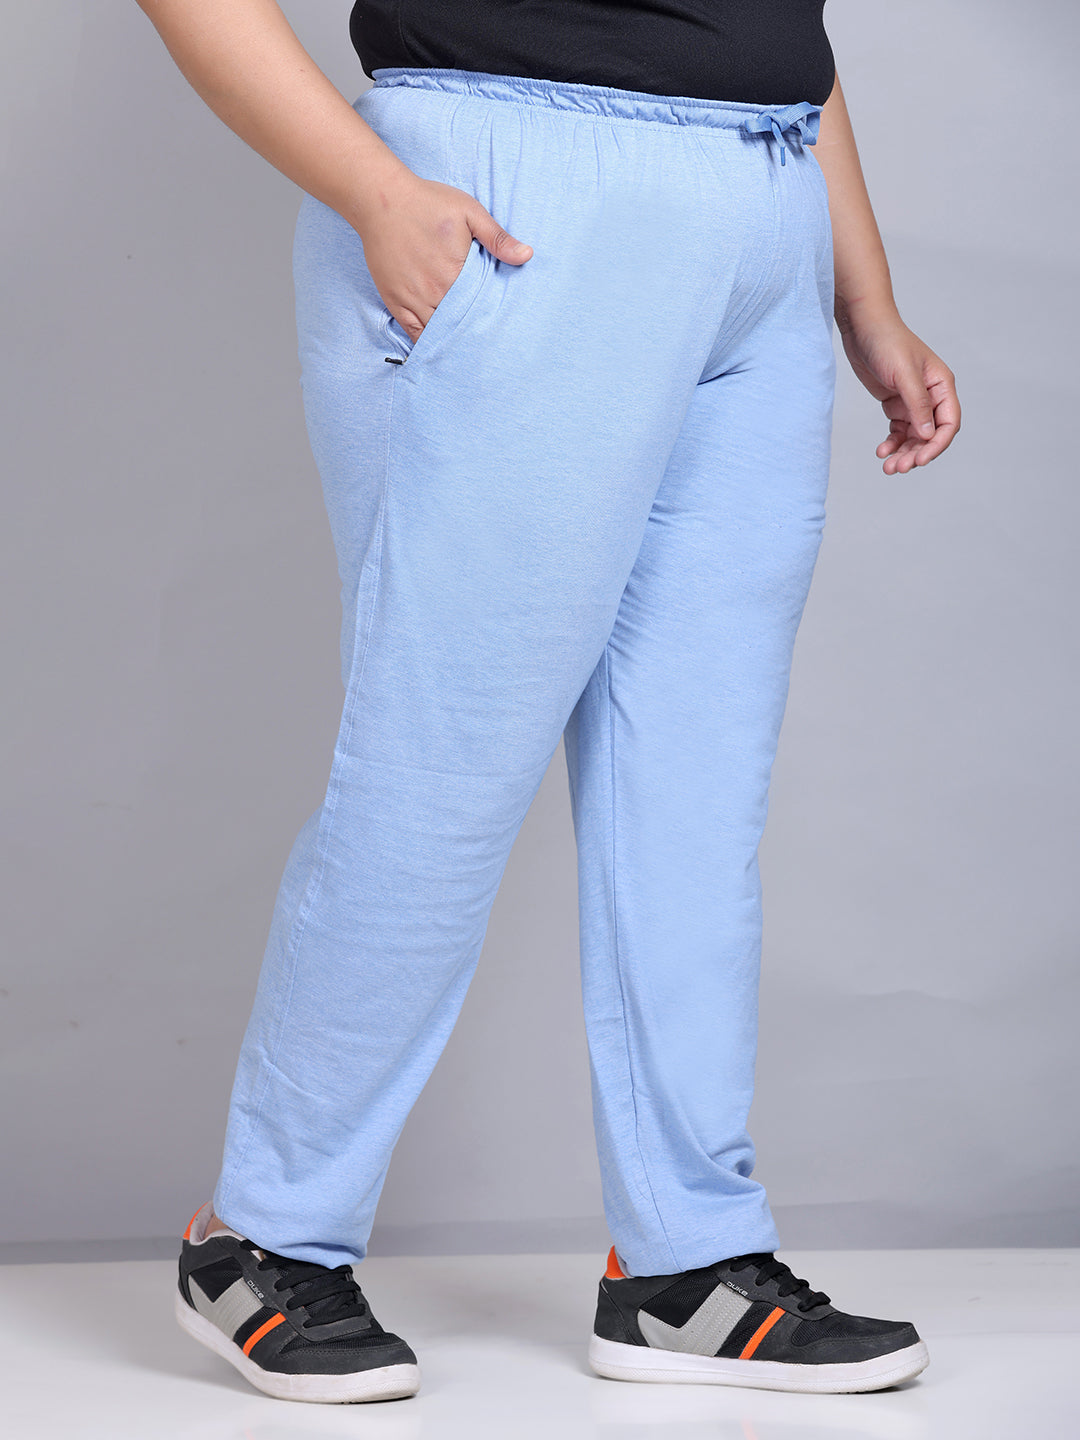 Cotton Track Pants For Women Regular Fit Lounge Pants Lowers Wine  Cupid  Clothings